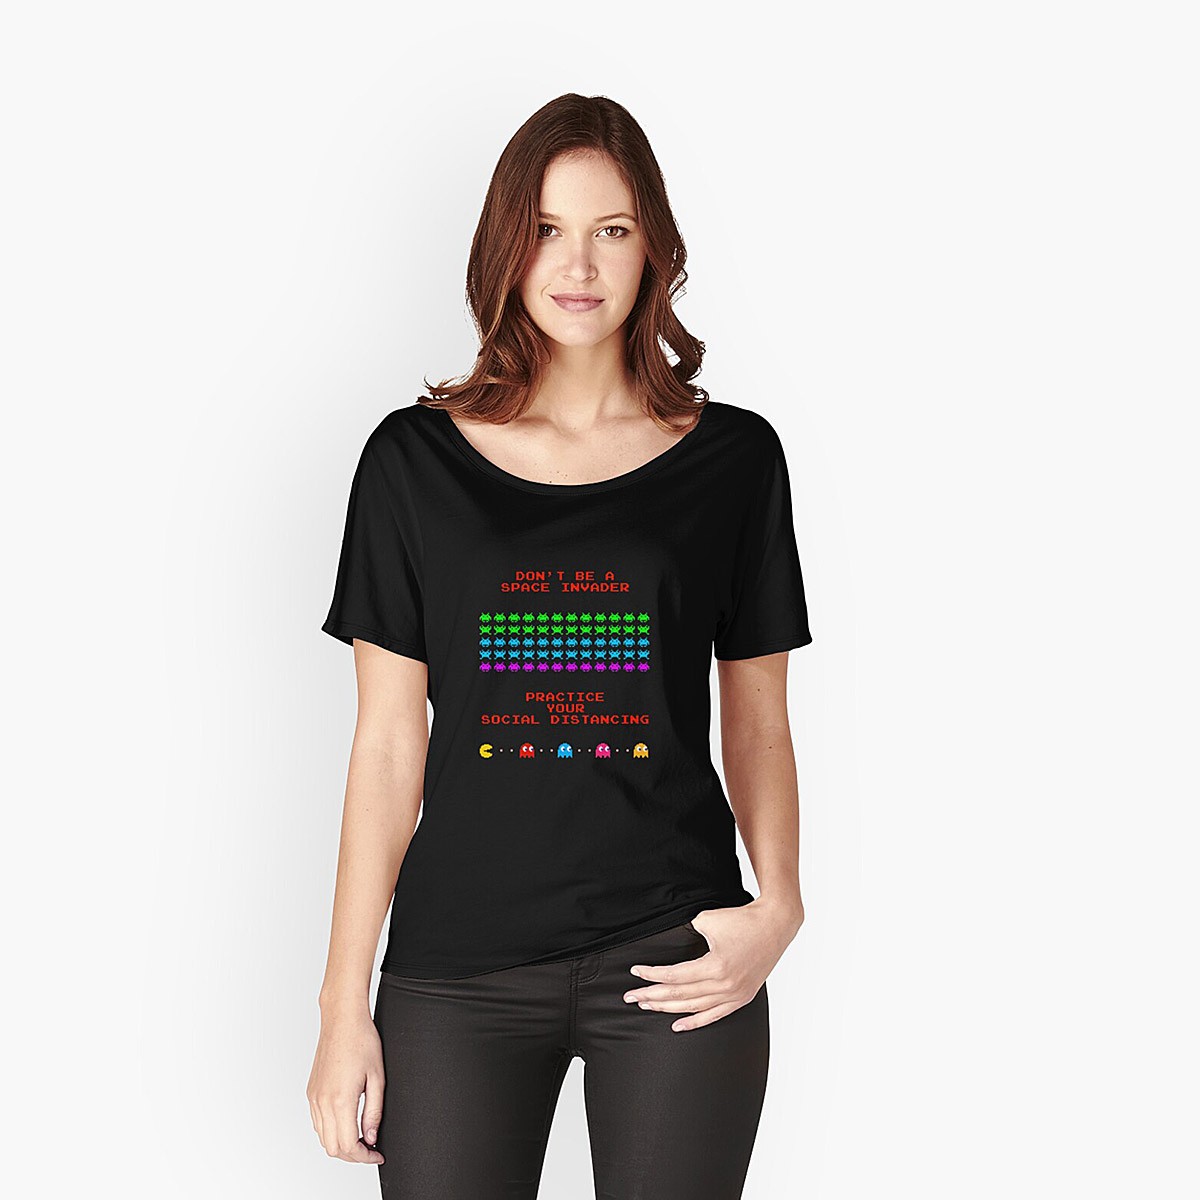 Don't be a Space Invader - Practice Social Distancing Relaxed Fit T-Shirt - 